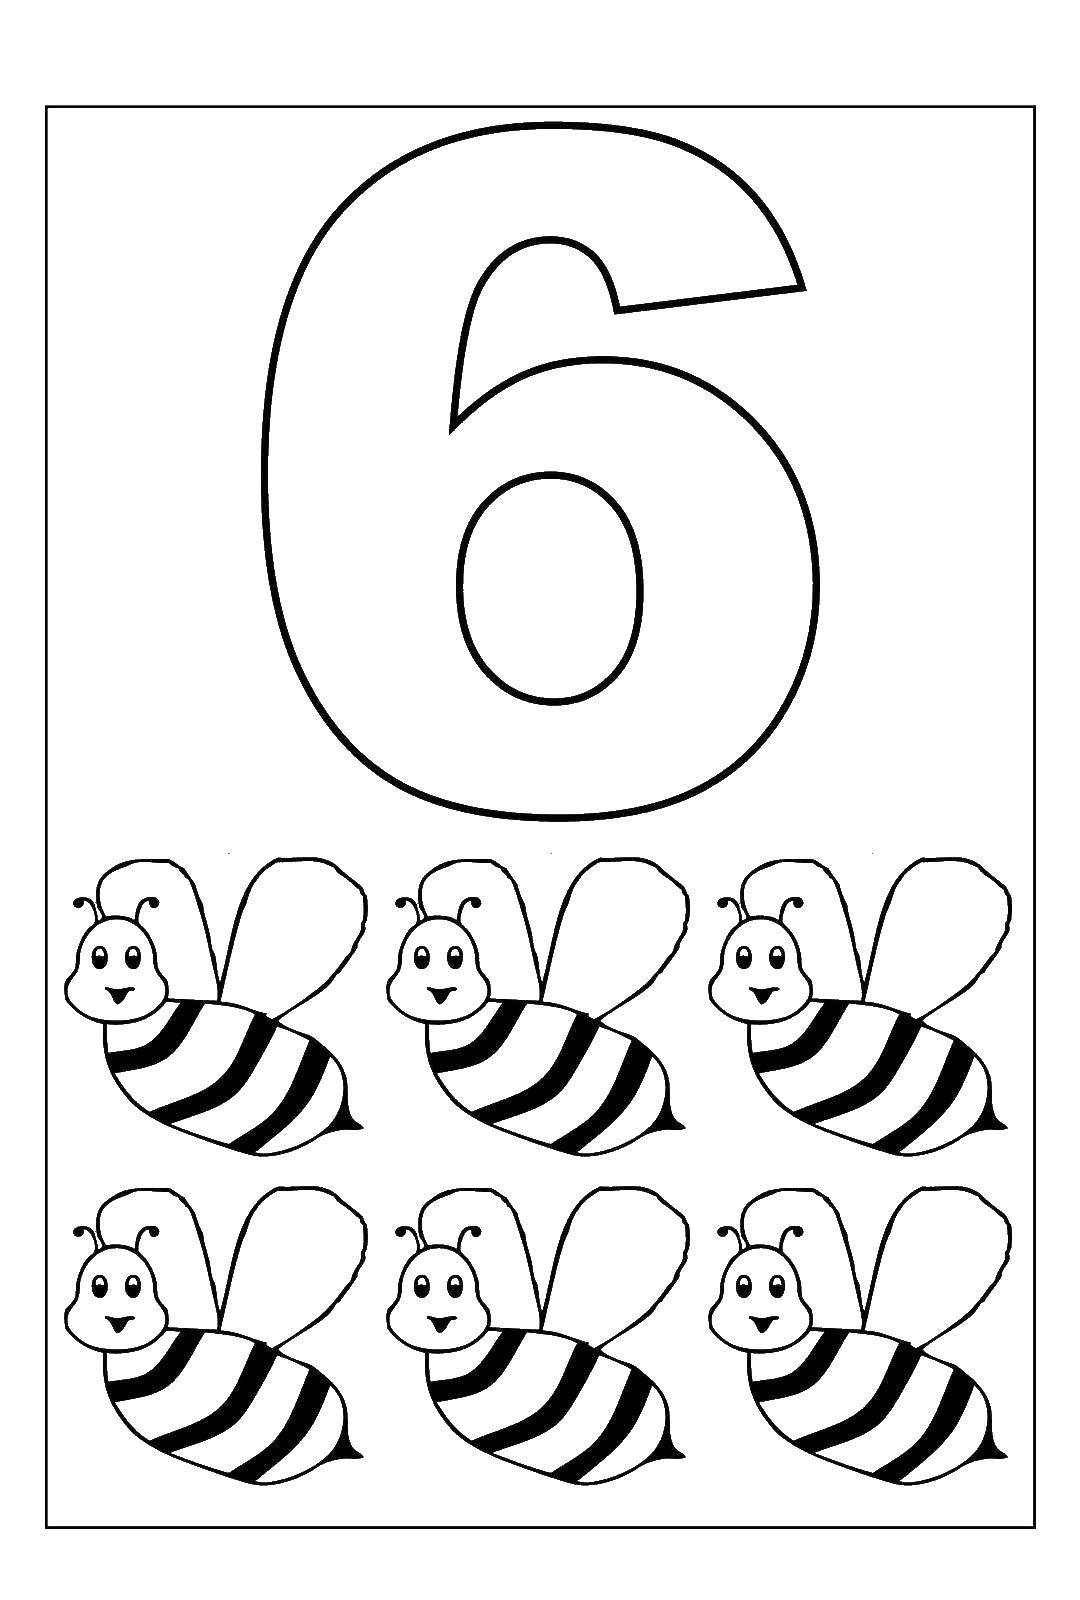 Coloring 6 bees. Category bee. Tags:  bees.